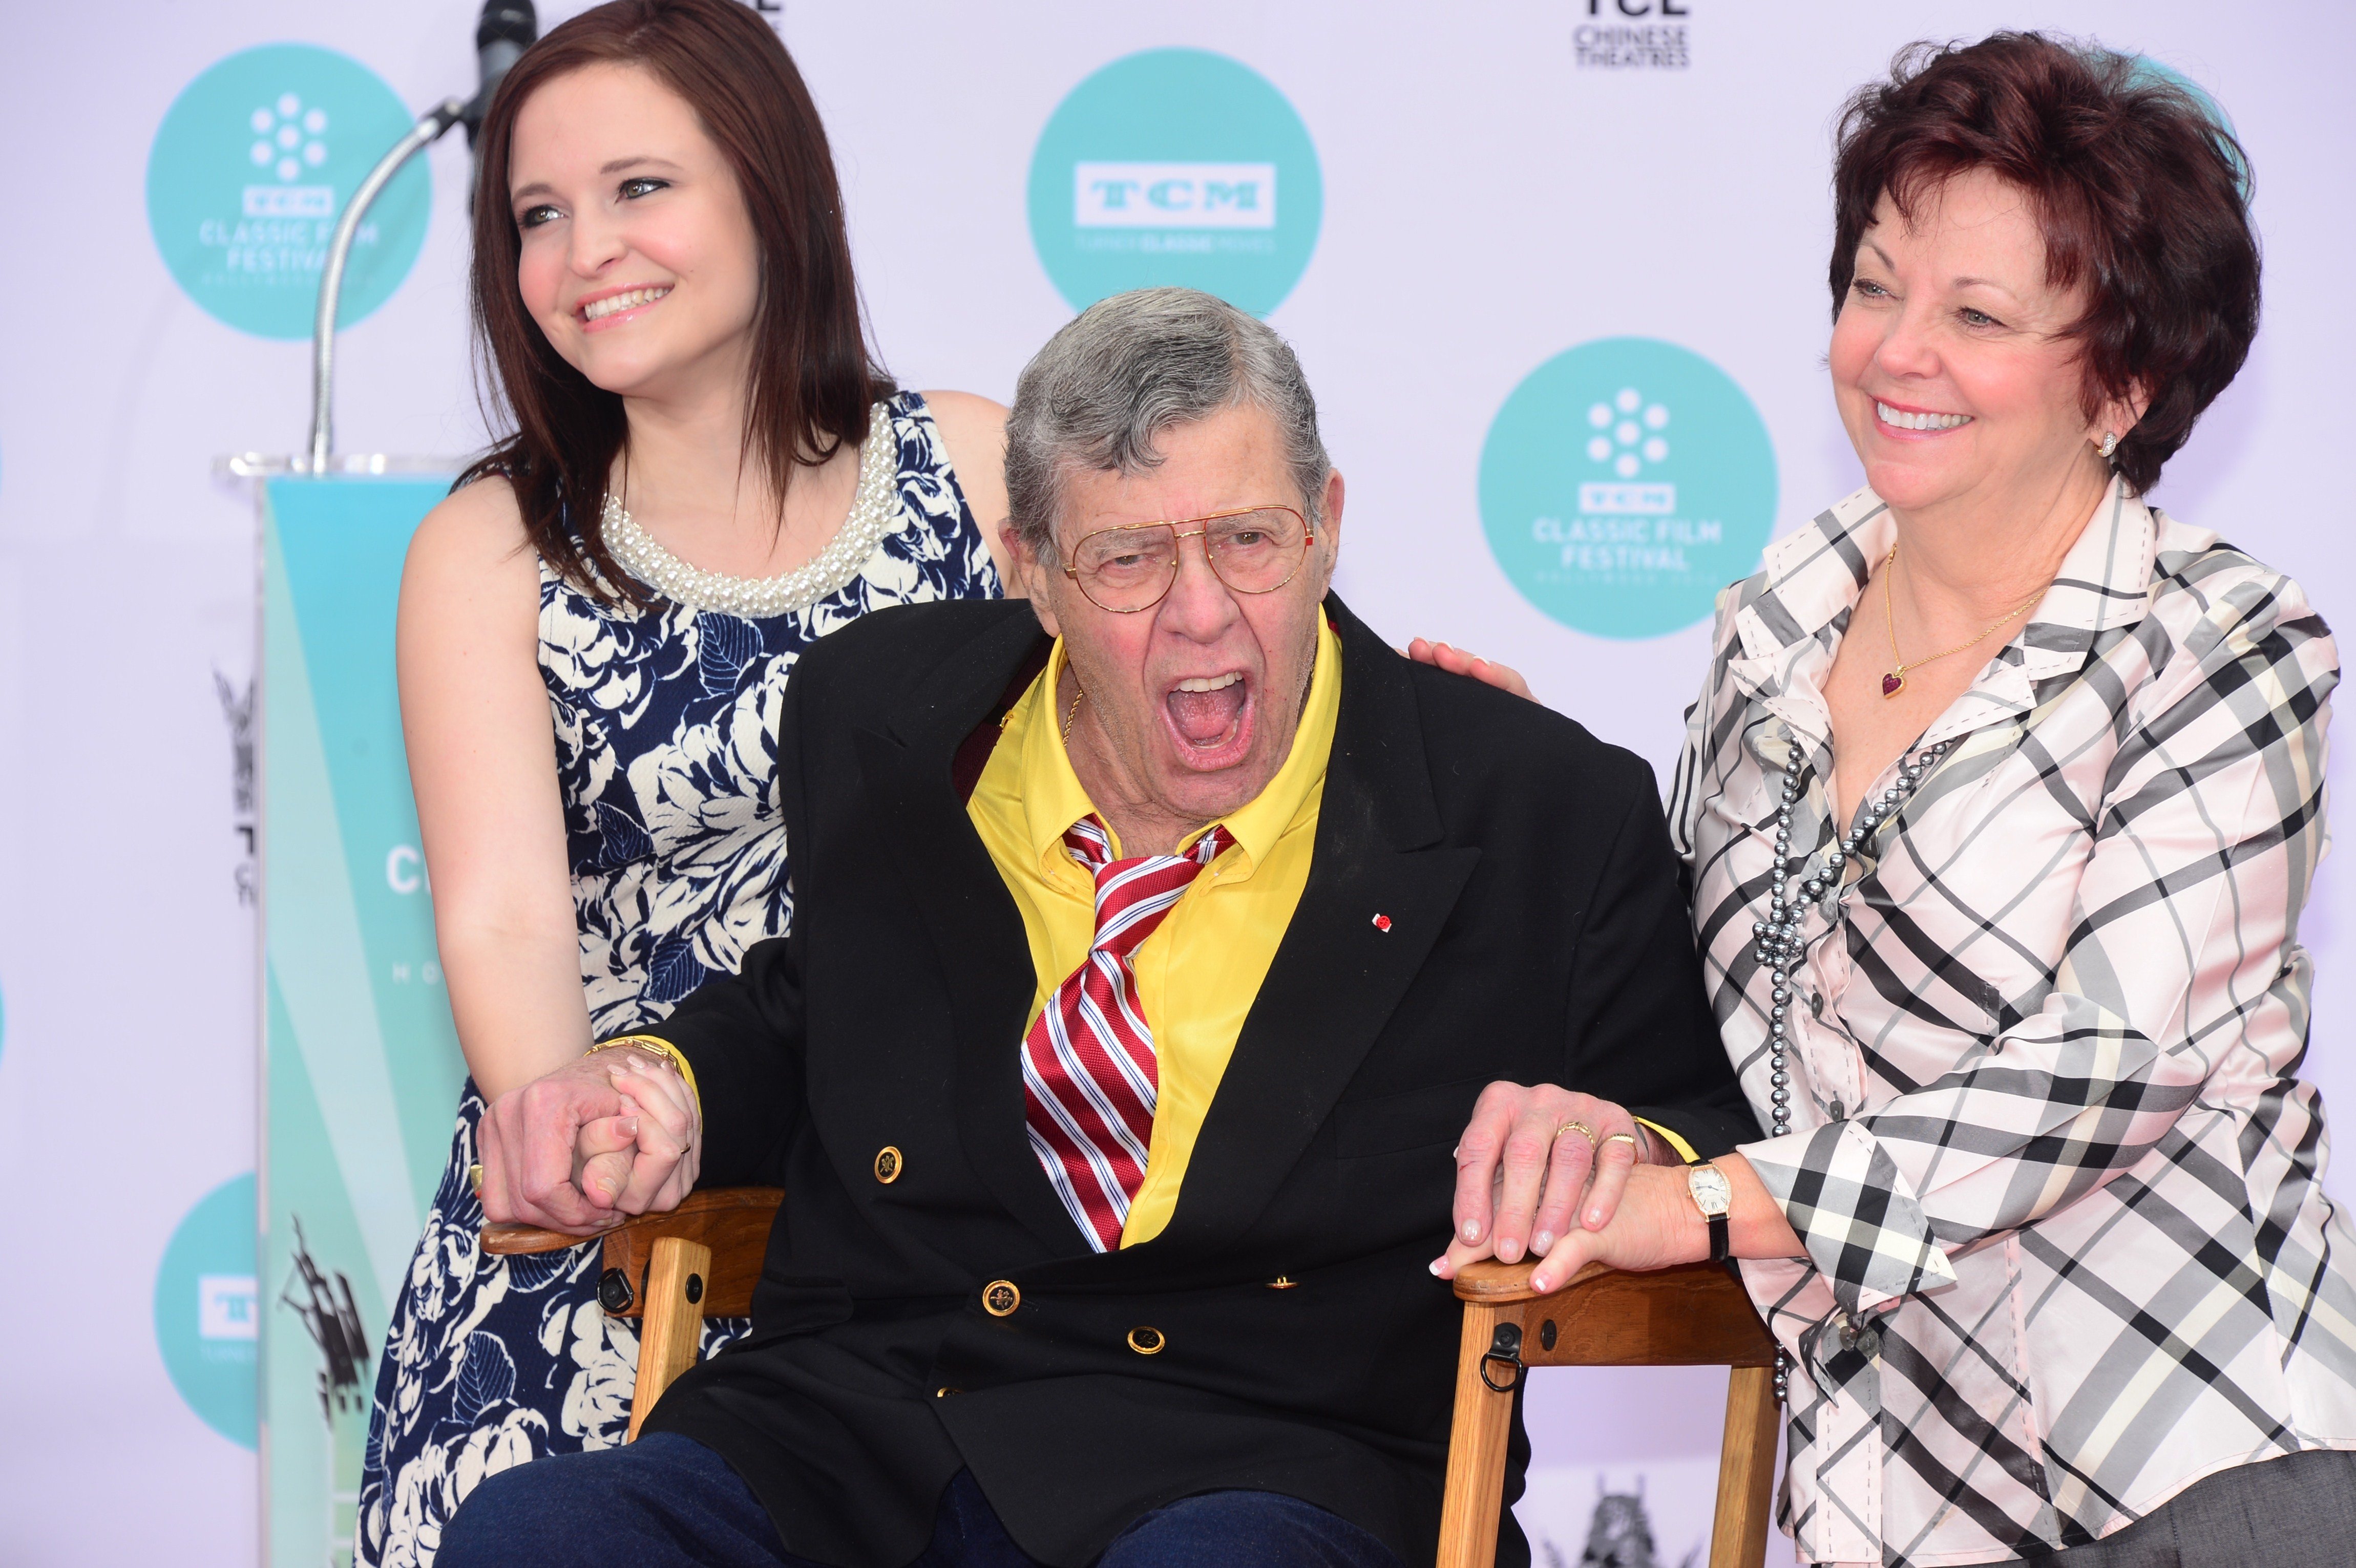 Jerry Lewis poses with SanDee Pitnick and daughter Danielle at his Hand and Footprint ceremony held at the TCL Theater on April 12, 2014 in Hollywood, California.  / Source: Getty Images